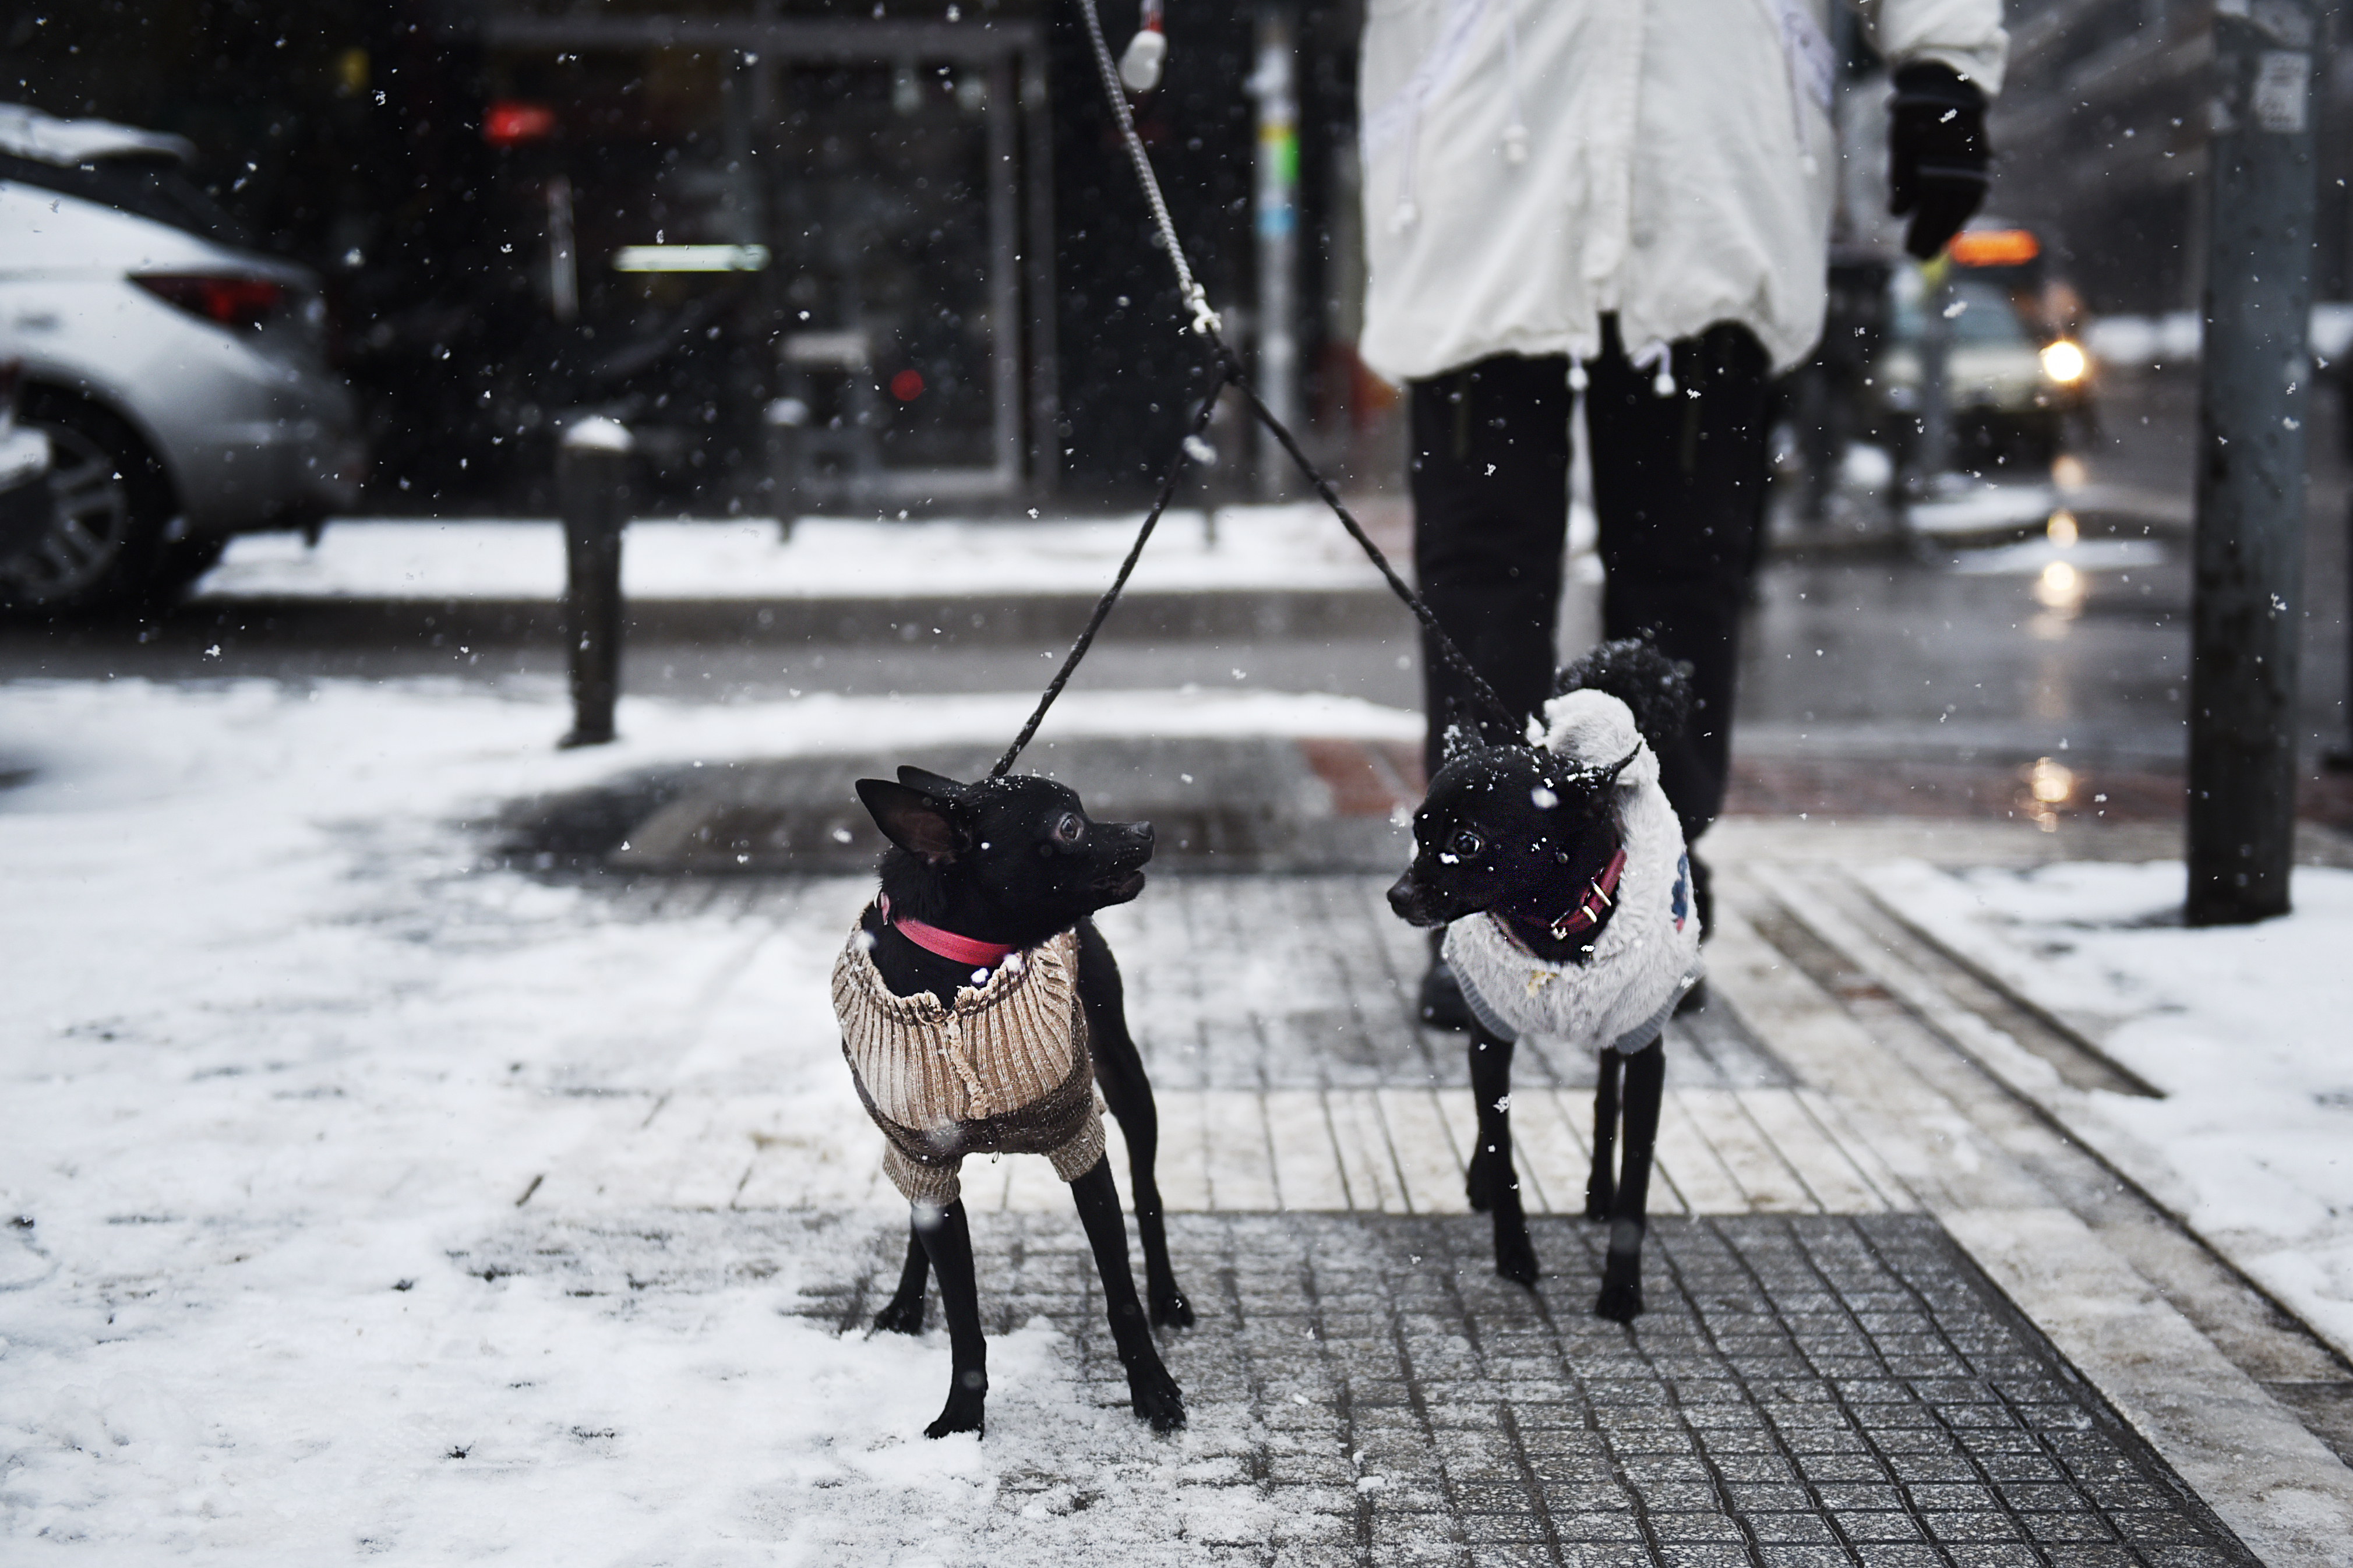 Top 5 Tips to Keep Your Dog Safe & Warm This Winter